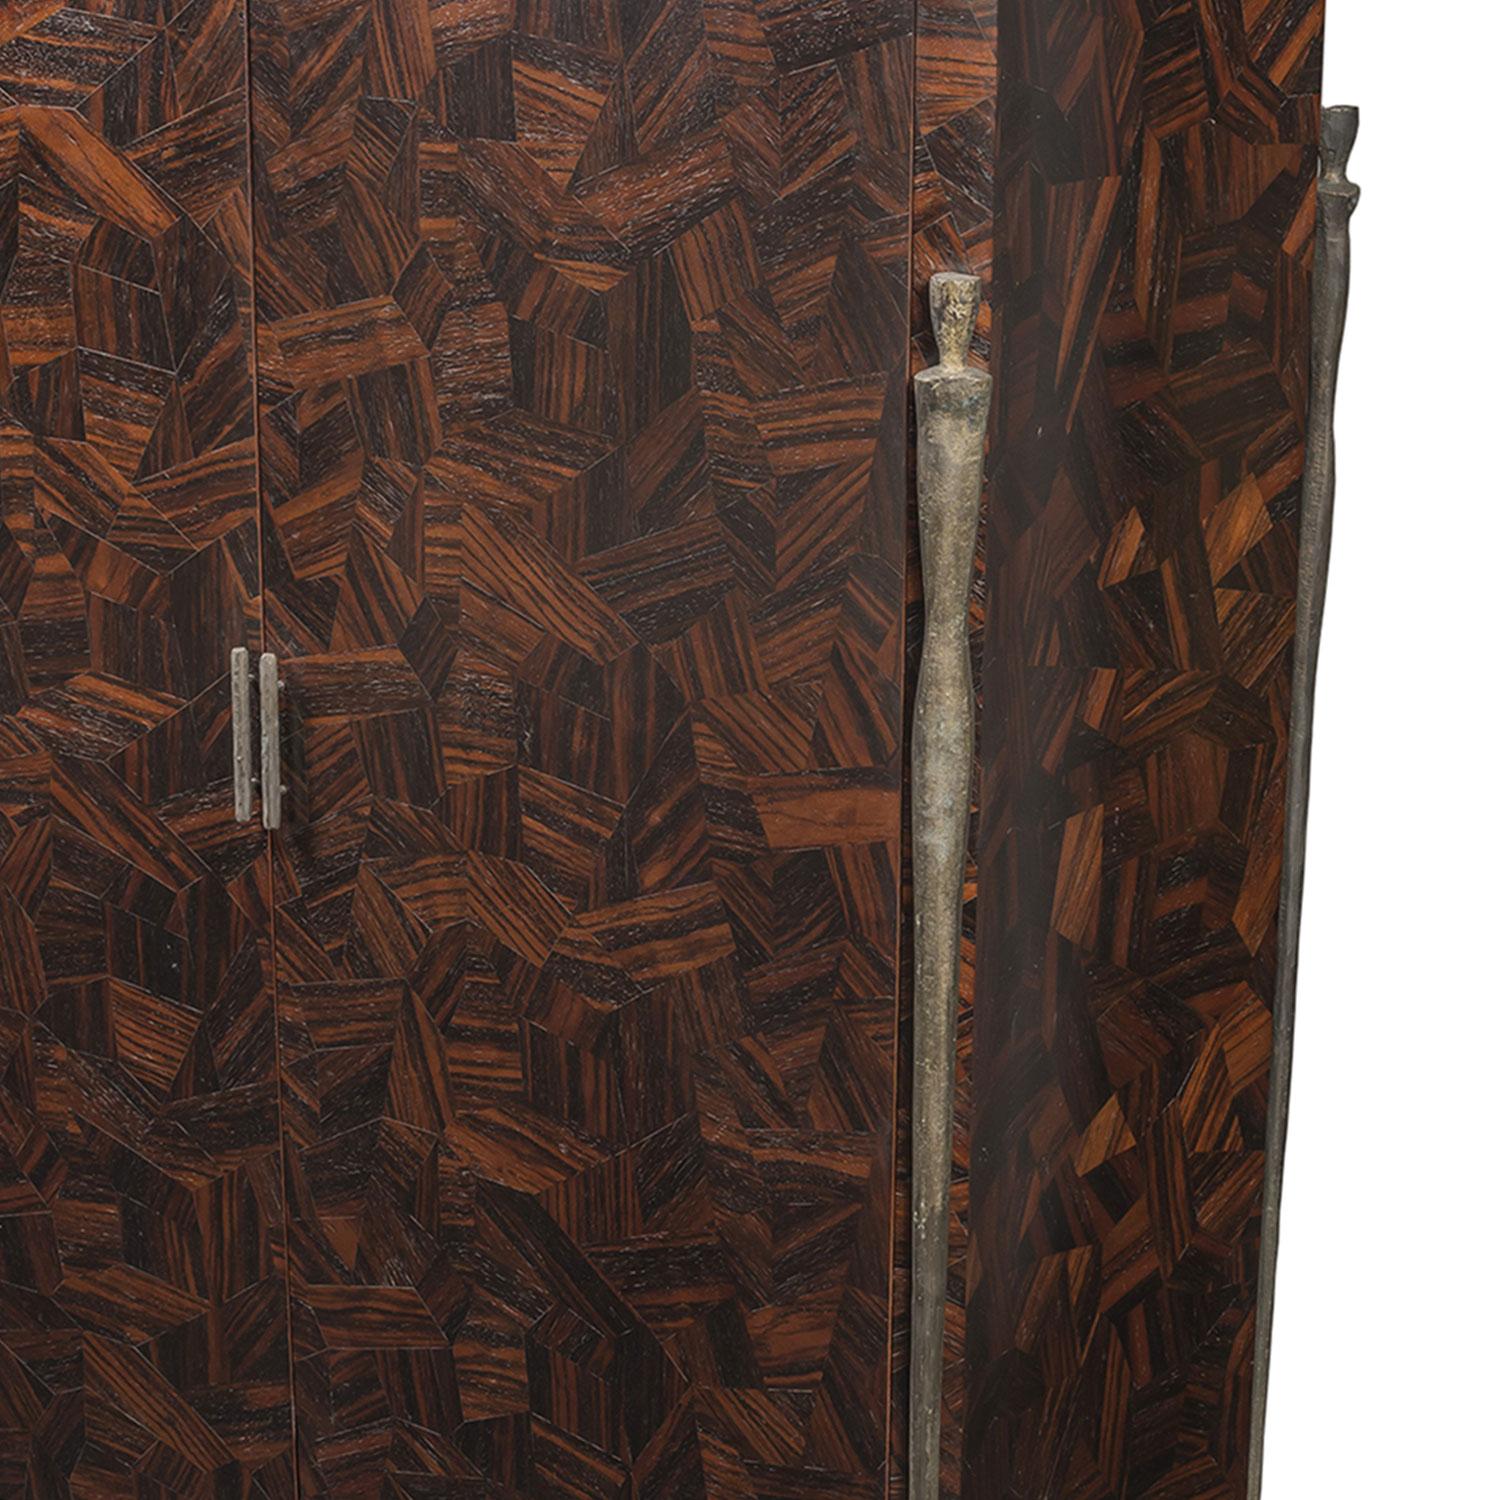 Macassar ebony parquetry, bronze hardware, concave door fronts and curved granite top come together to form the Cabinet Bruck. Long bronze Giacometti-inspired pier legs adorn the four corners with matching bronze cabinet pulls on the inward-curving